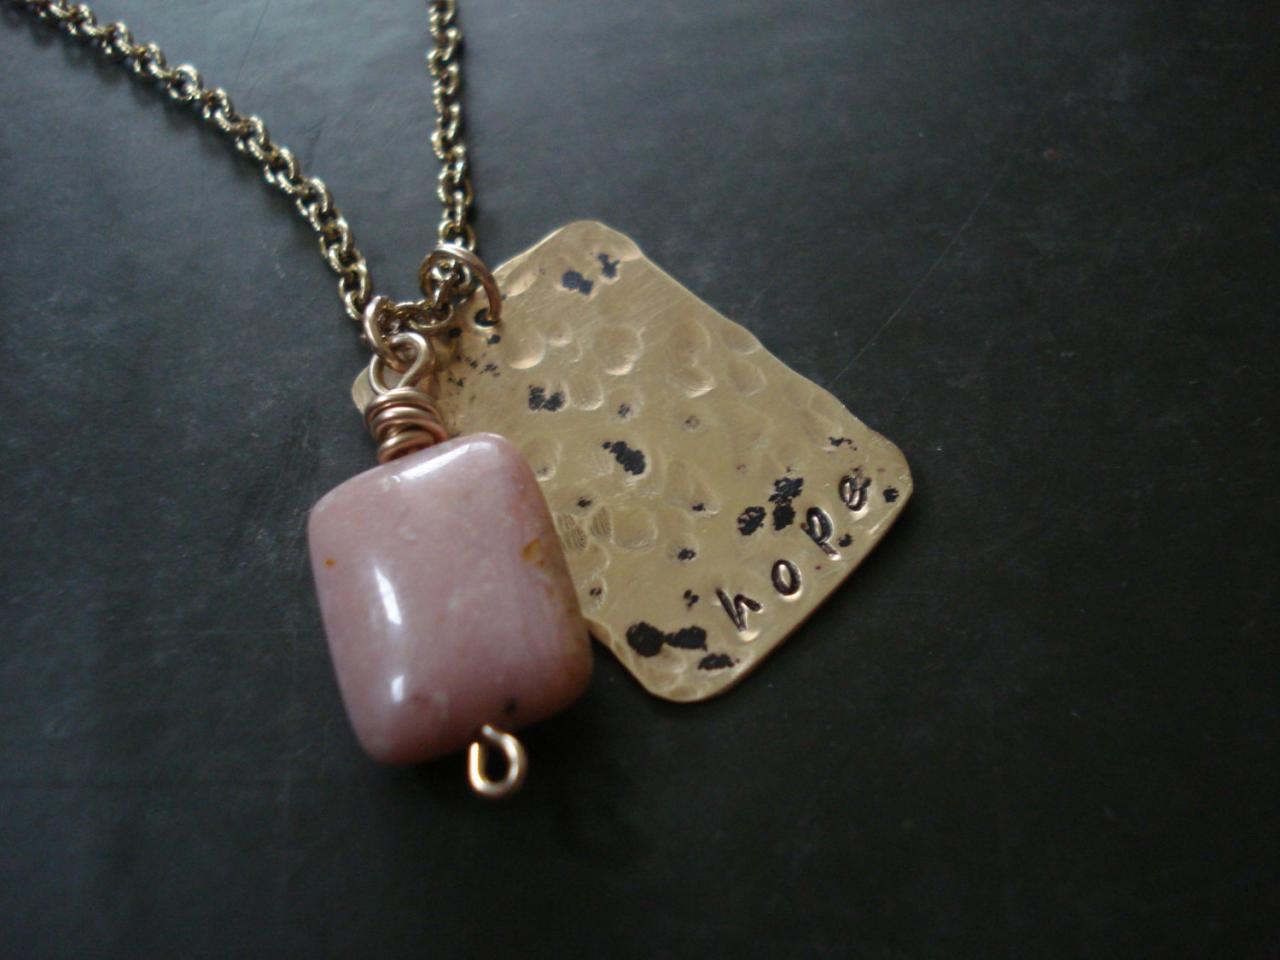 Hope Necklace, Breast Cancer Awareness Necklace, Brass And Gold Filled With Gem Stone Pendant